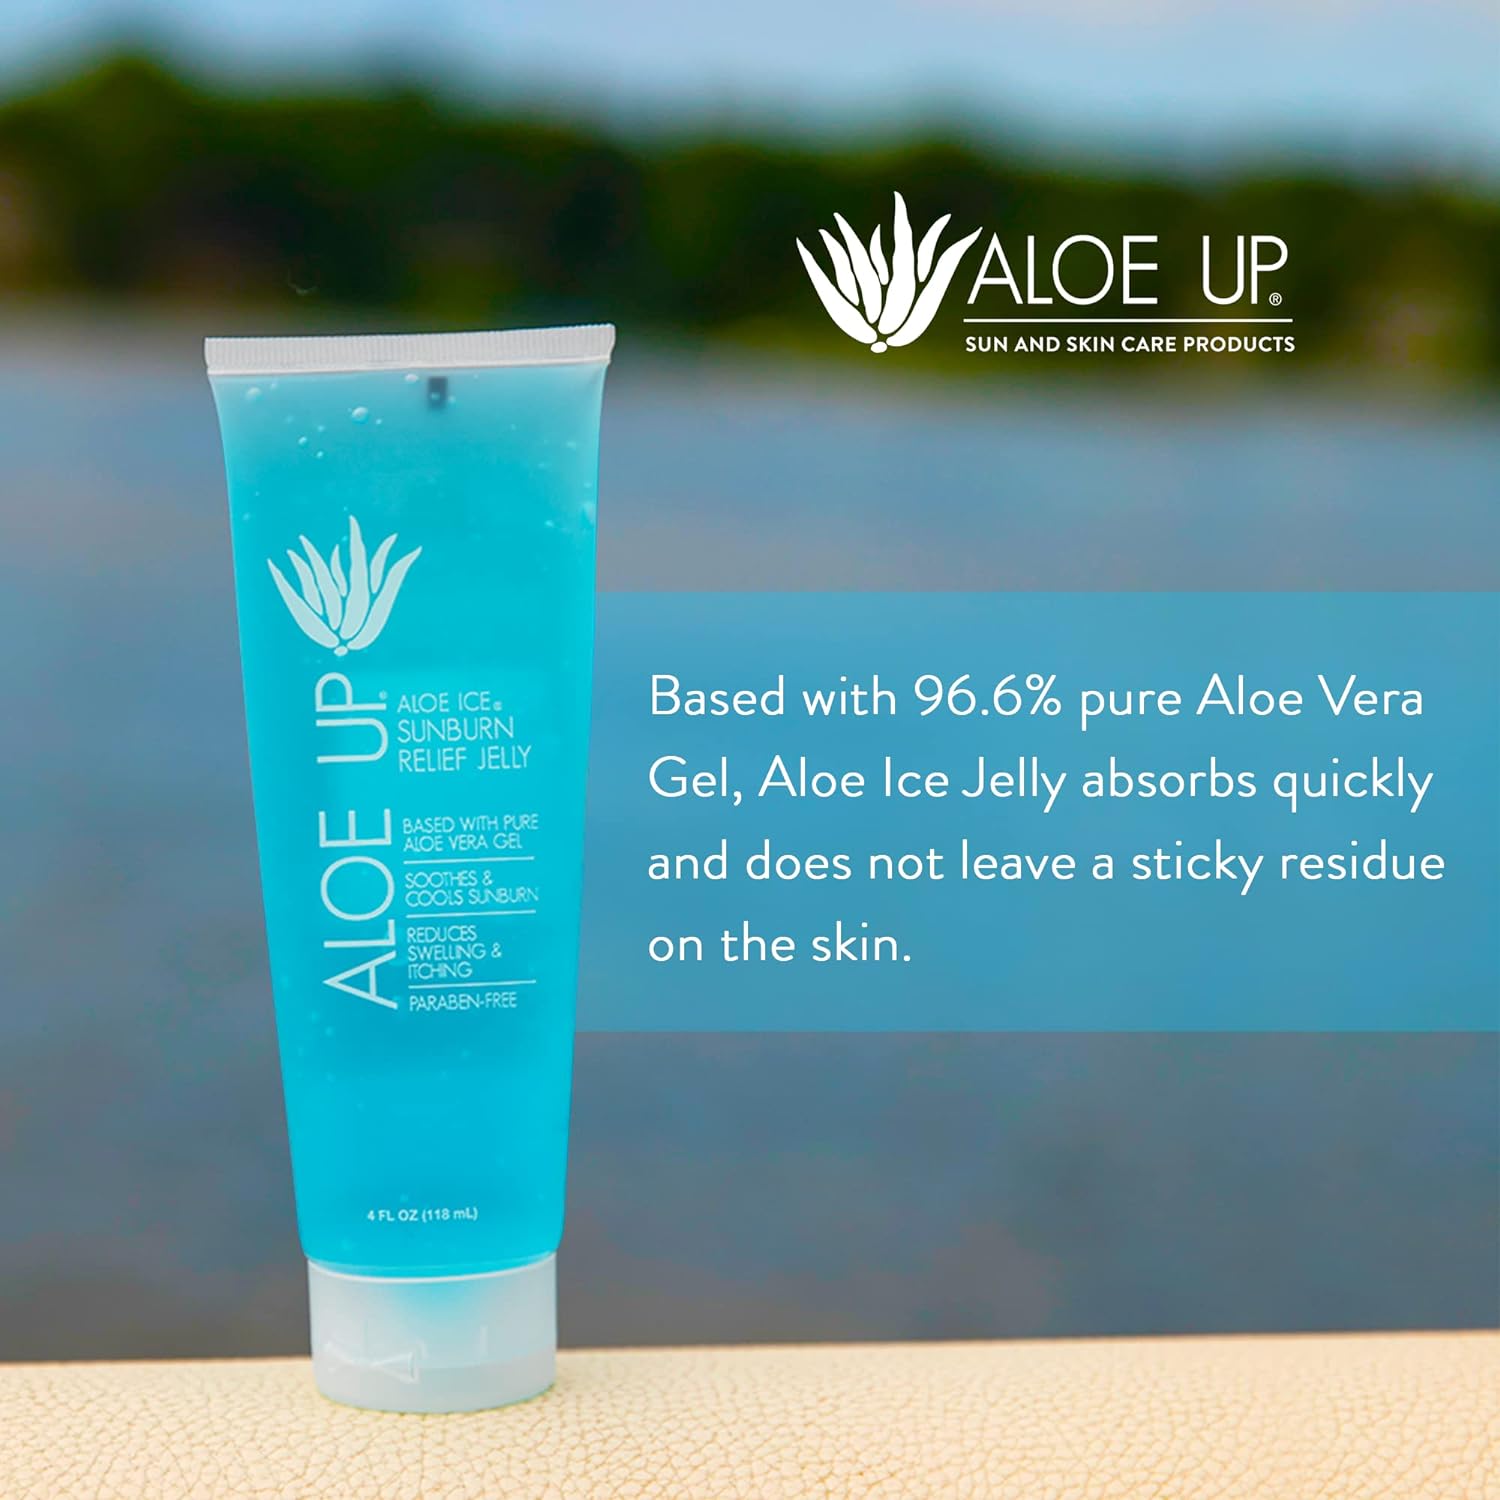 ALOE UP Aloe Ice Sunburn Relief Jelly - Face and Body Organic After Sun Gel - With 96.6% Pure Aloe Vera Gel and 2% Anesthetic Lidocaine - Reef Safe - Alcohol- and Fragrance-Free - 4 Oz : Beauty & Personal Care